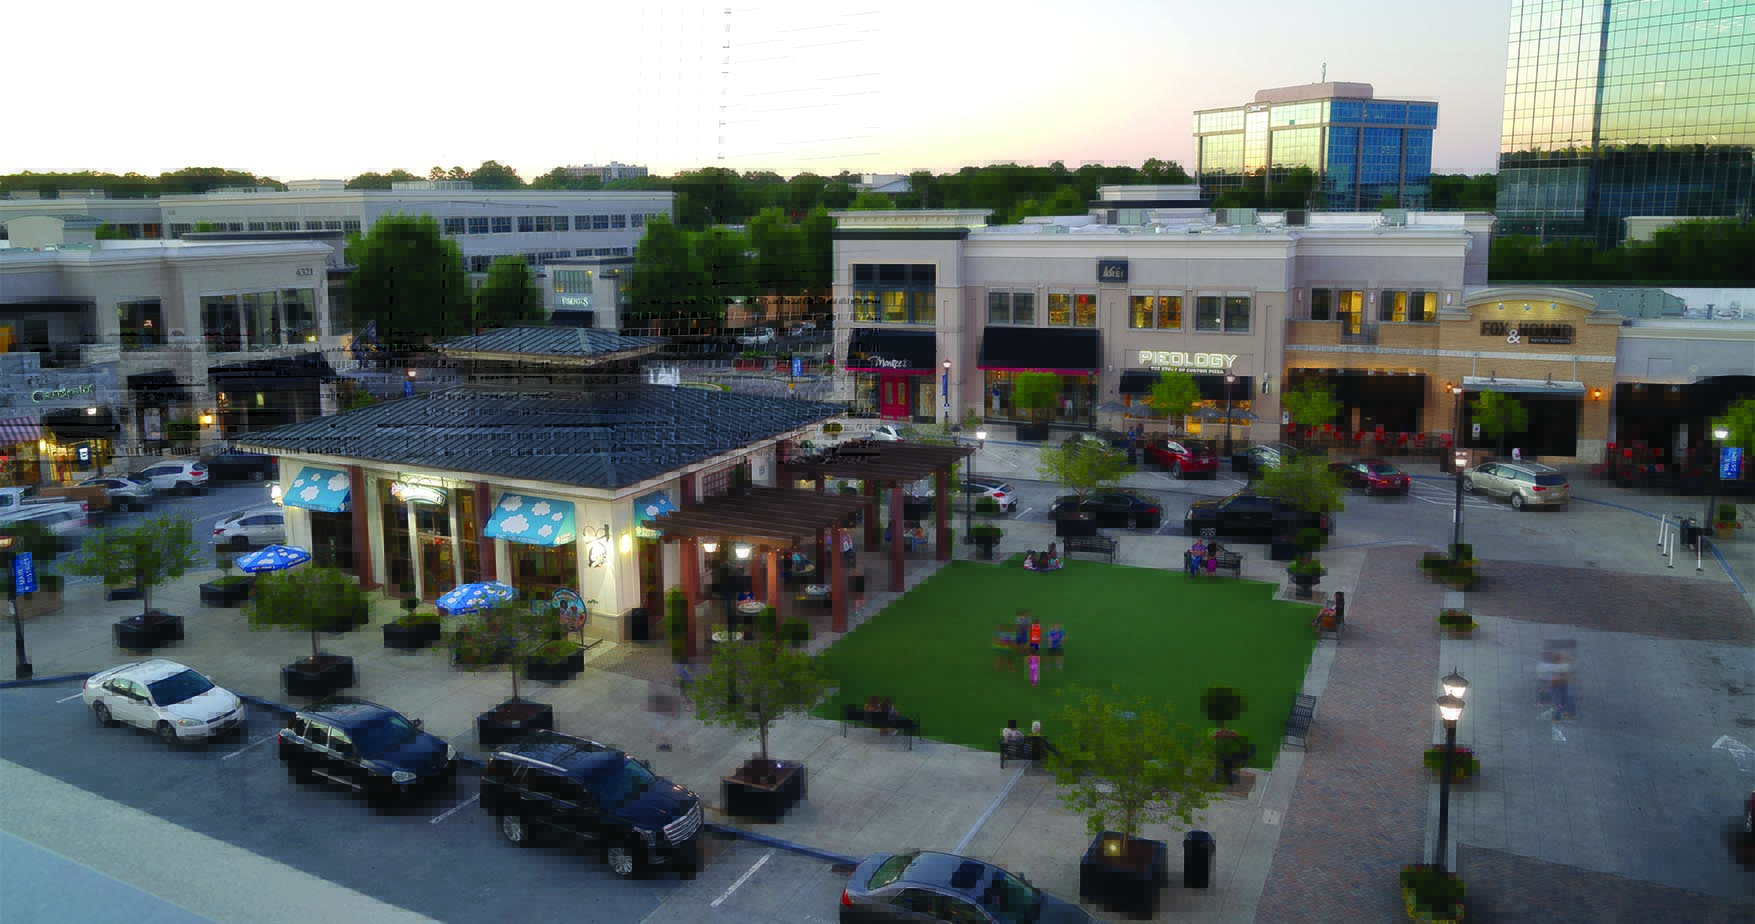 Vine North Hills - View of the neighborhood, specifically Ben & Jerry's and Pieology